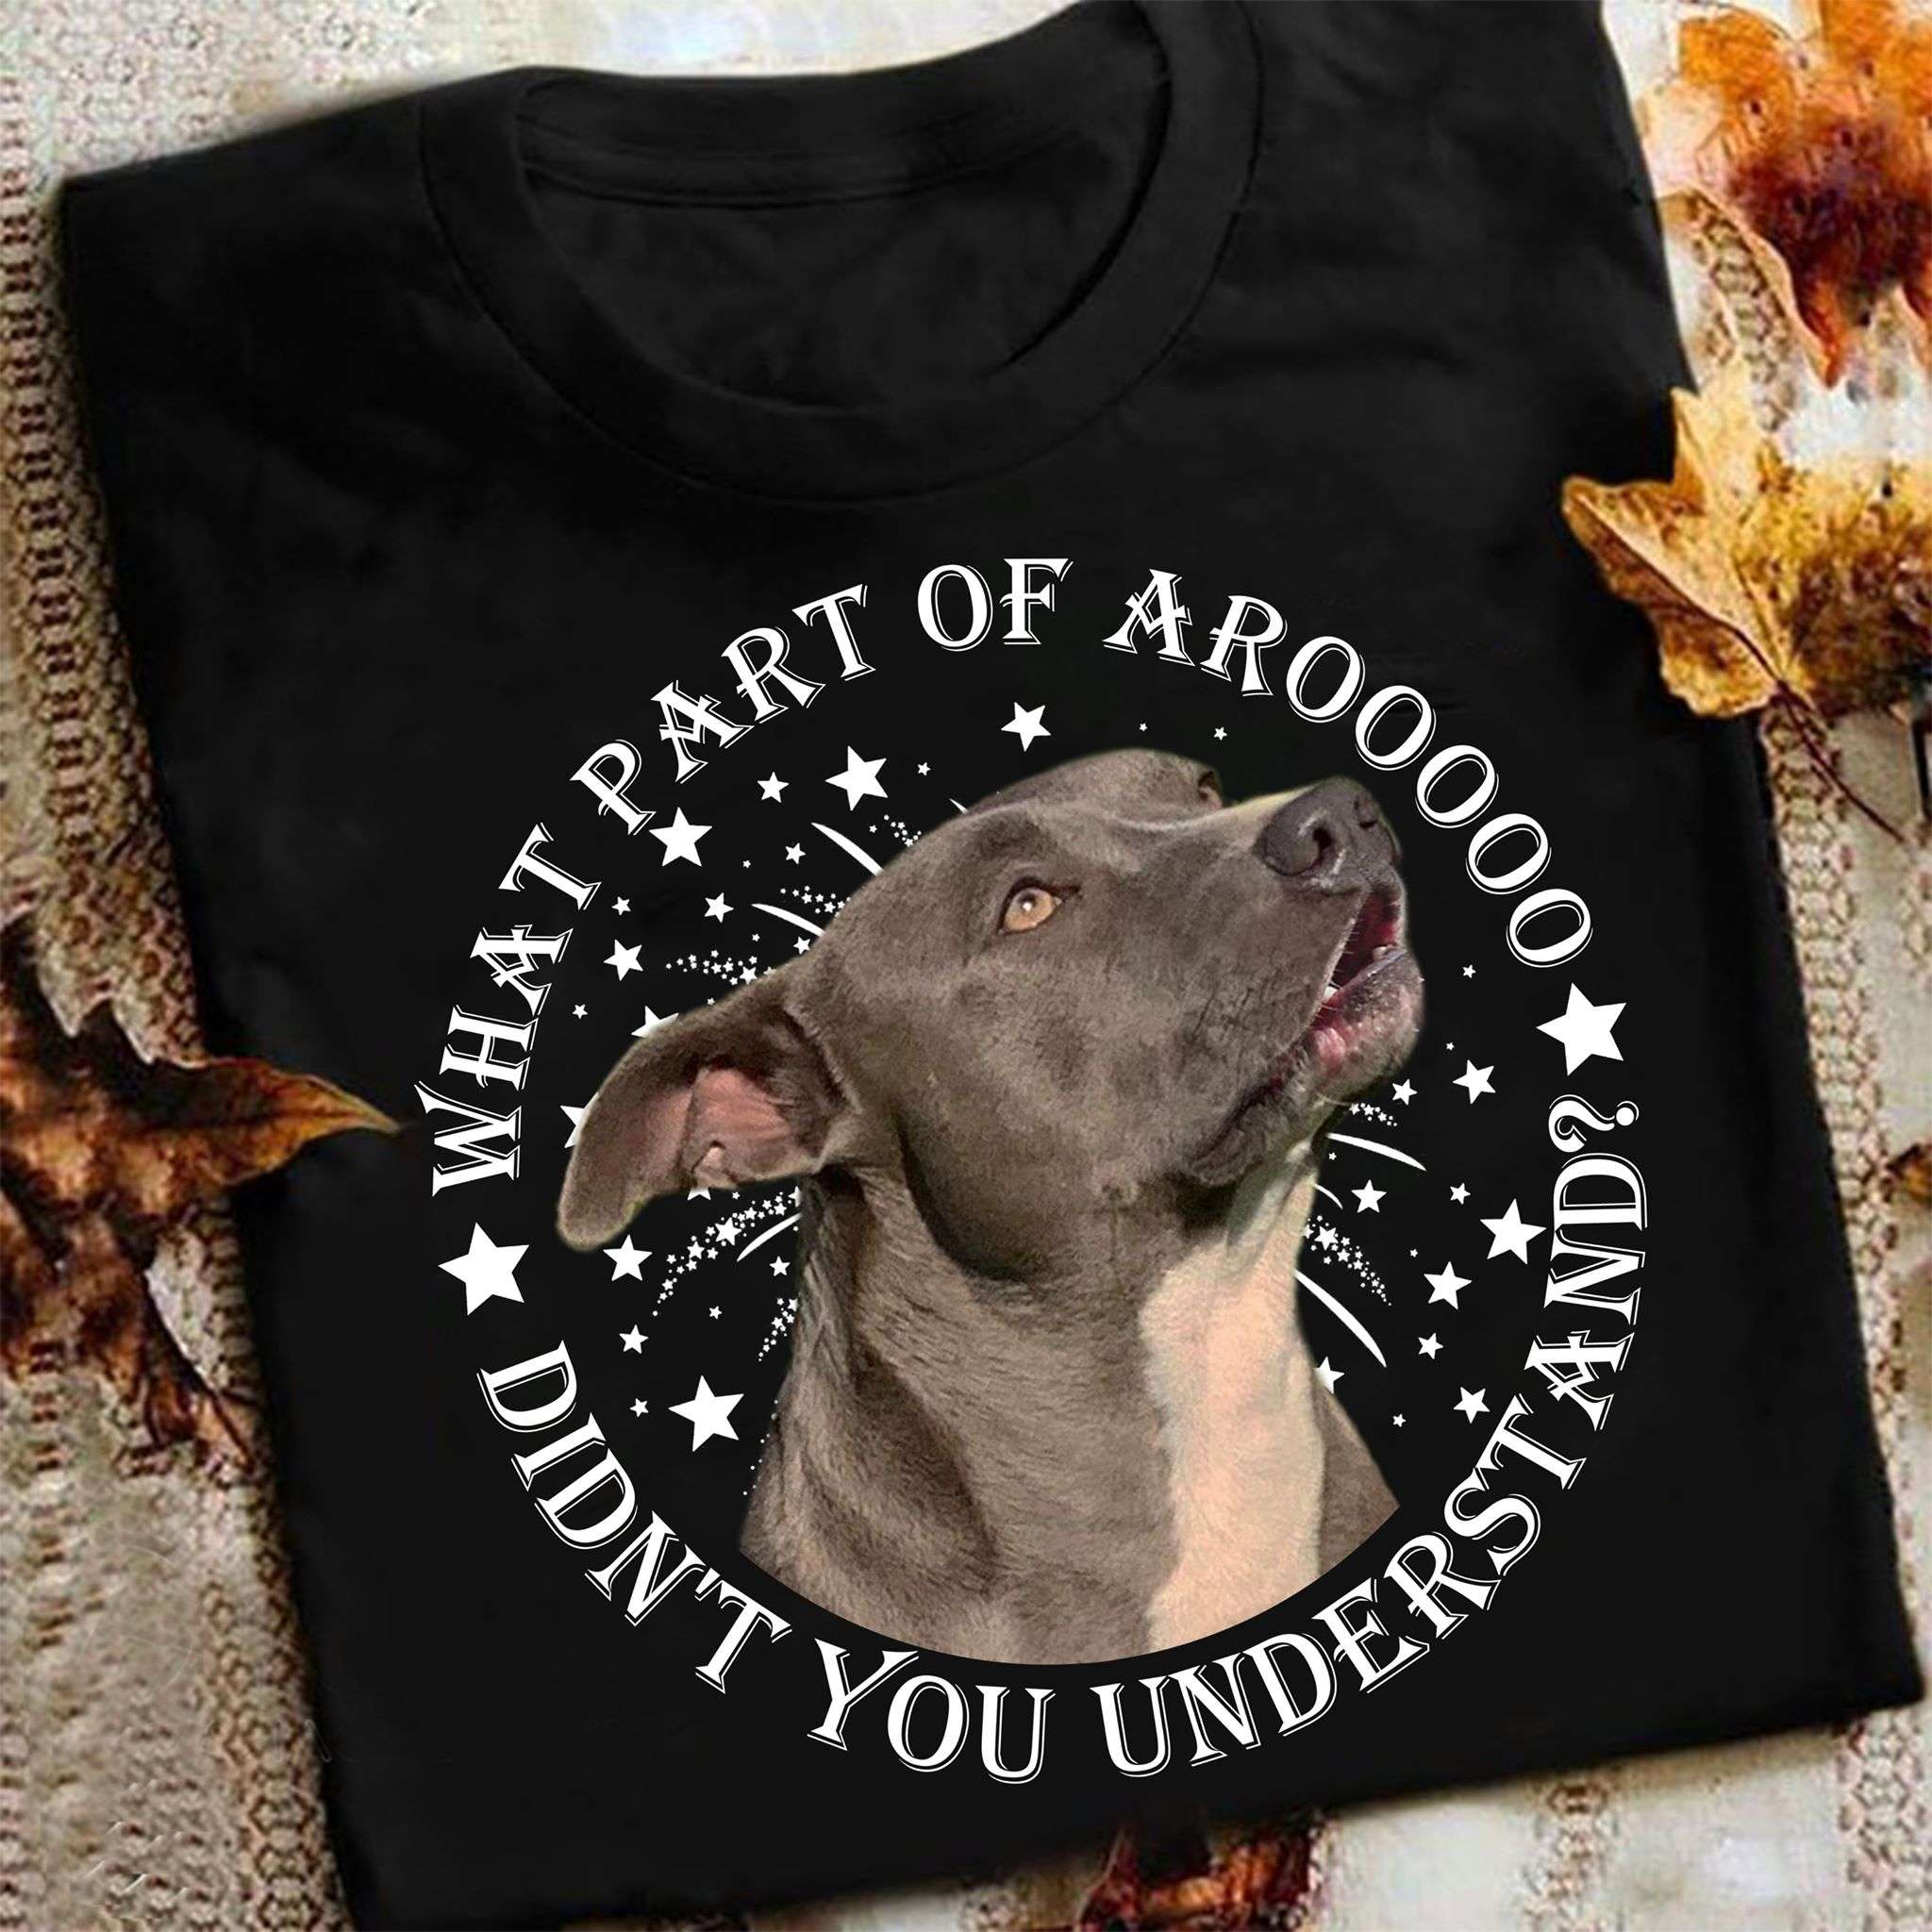 Staffordshire Terrier - What part of aroooo didn't you understand